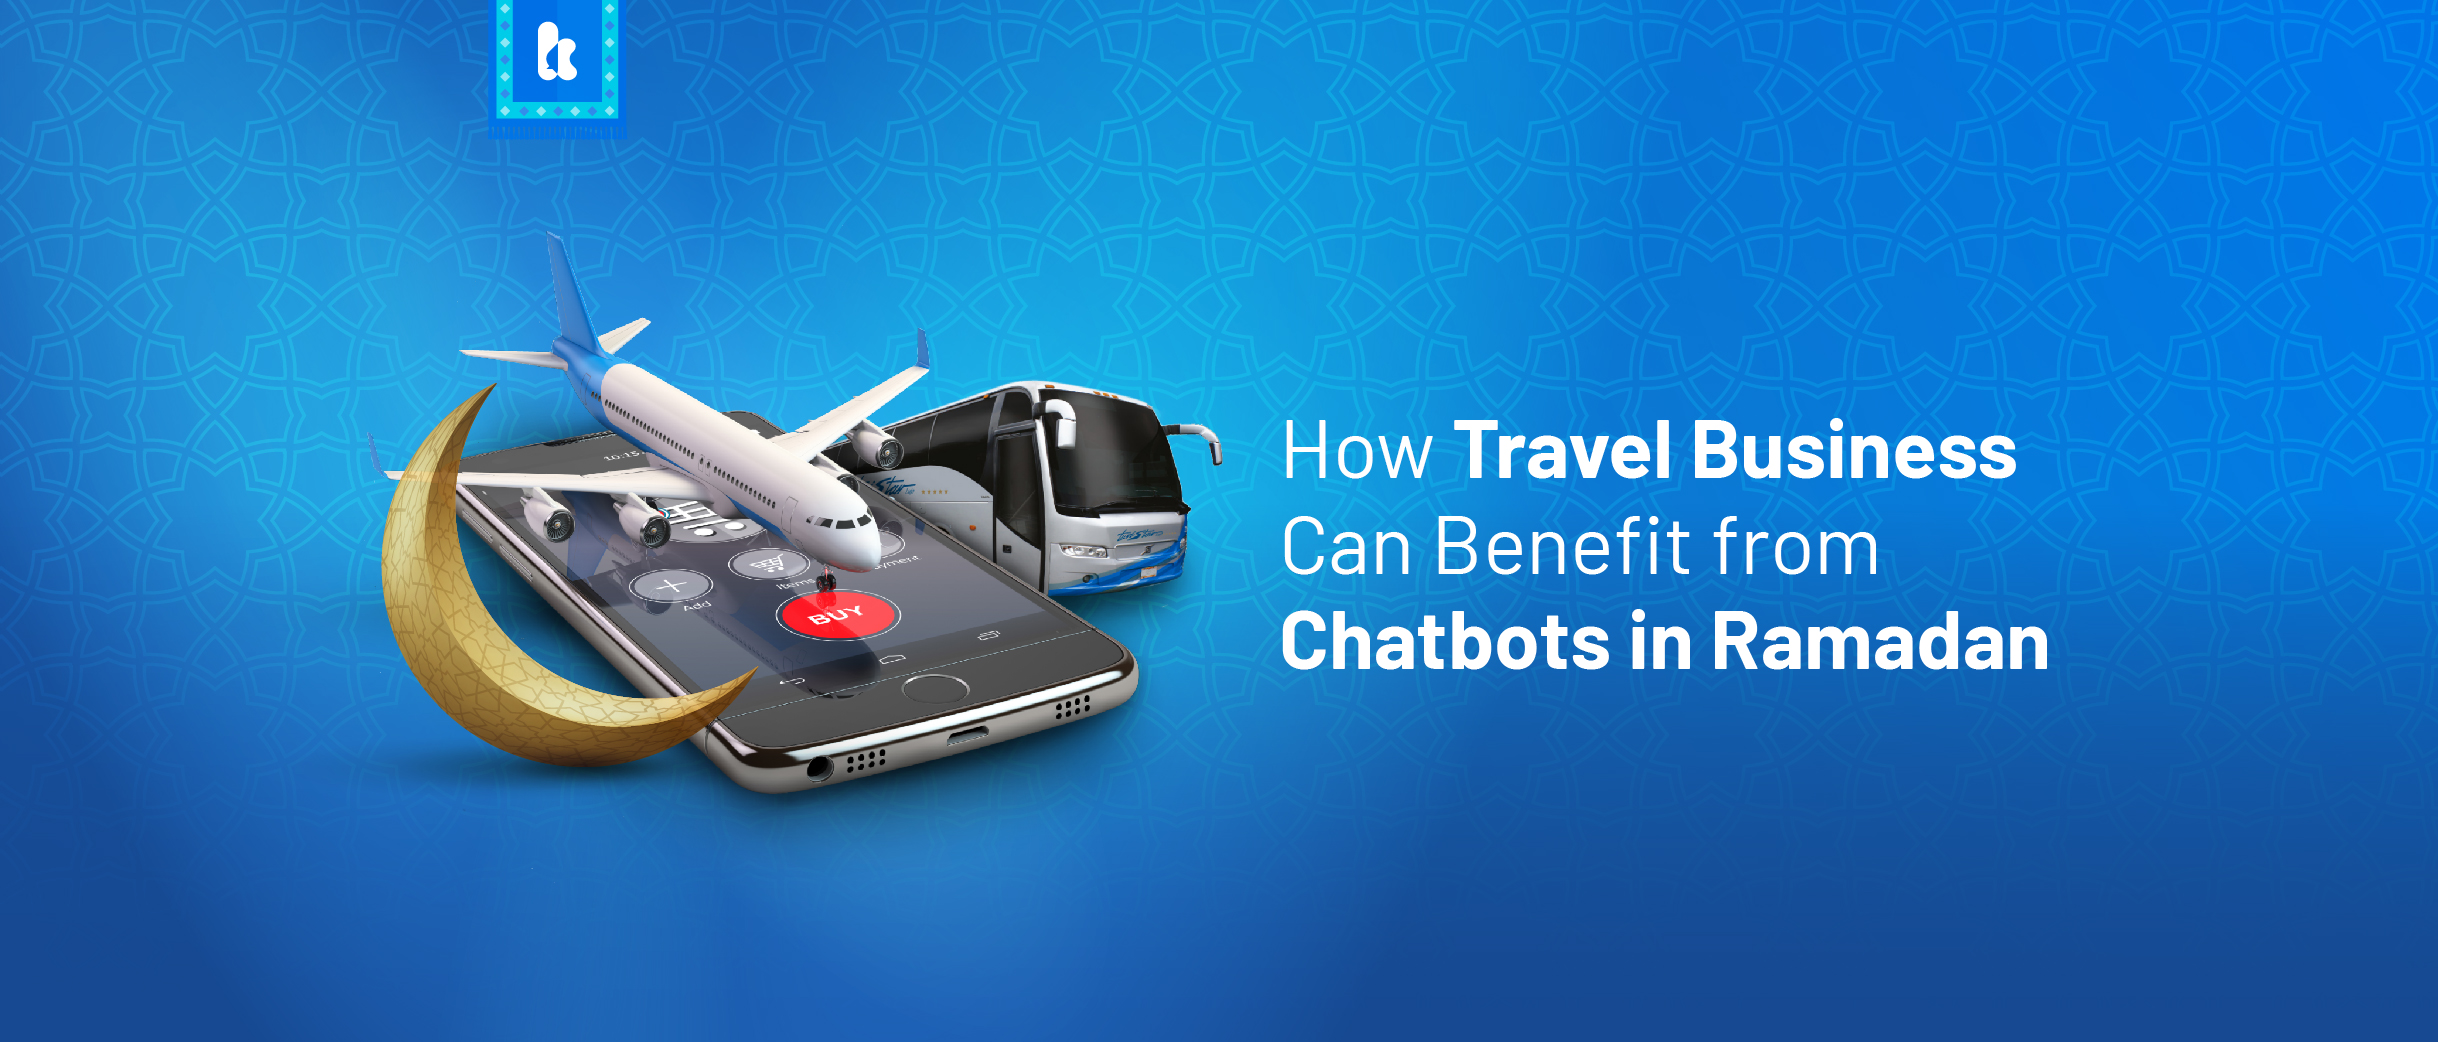 How Travel Business Can Benefit from Chatbots in Ramadan